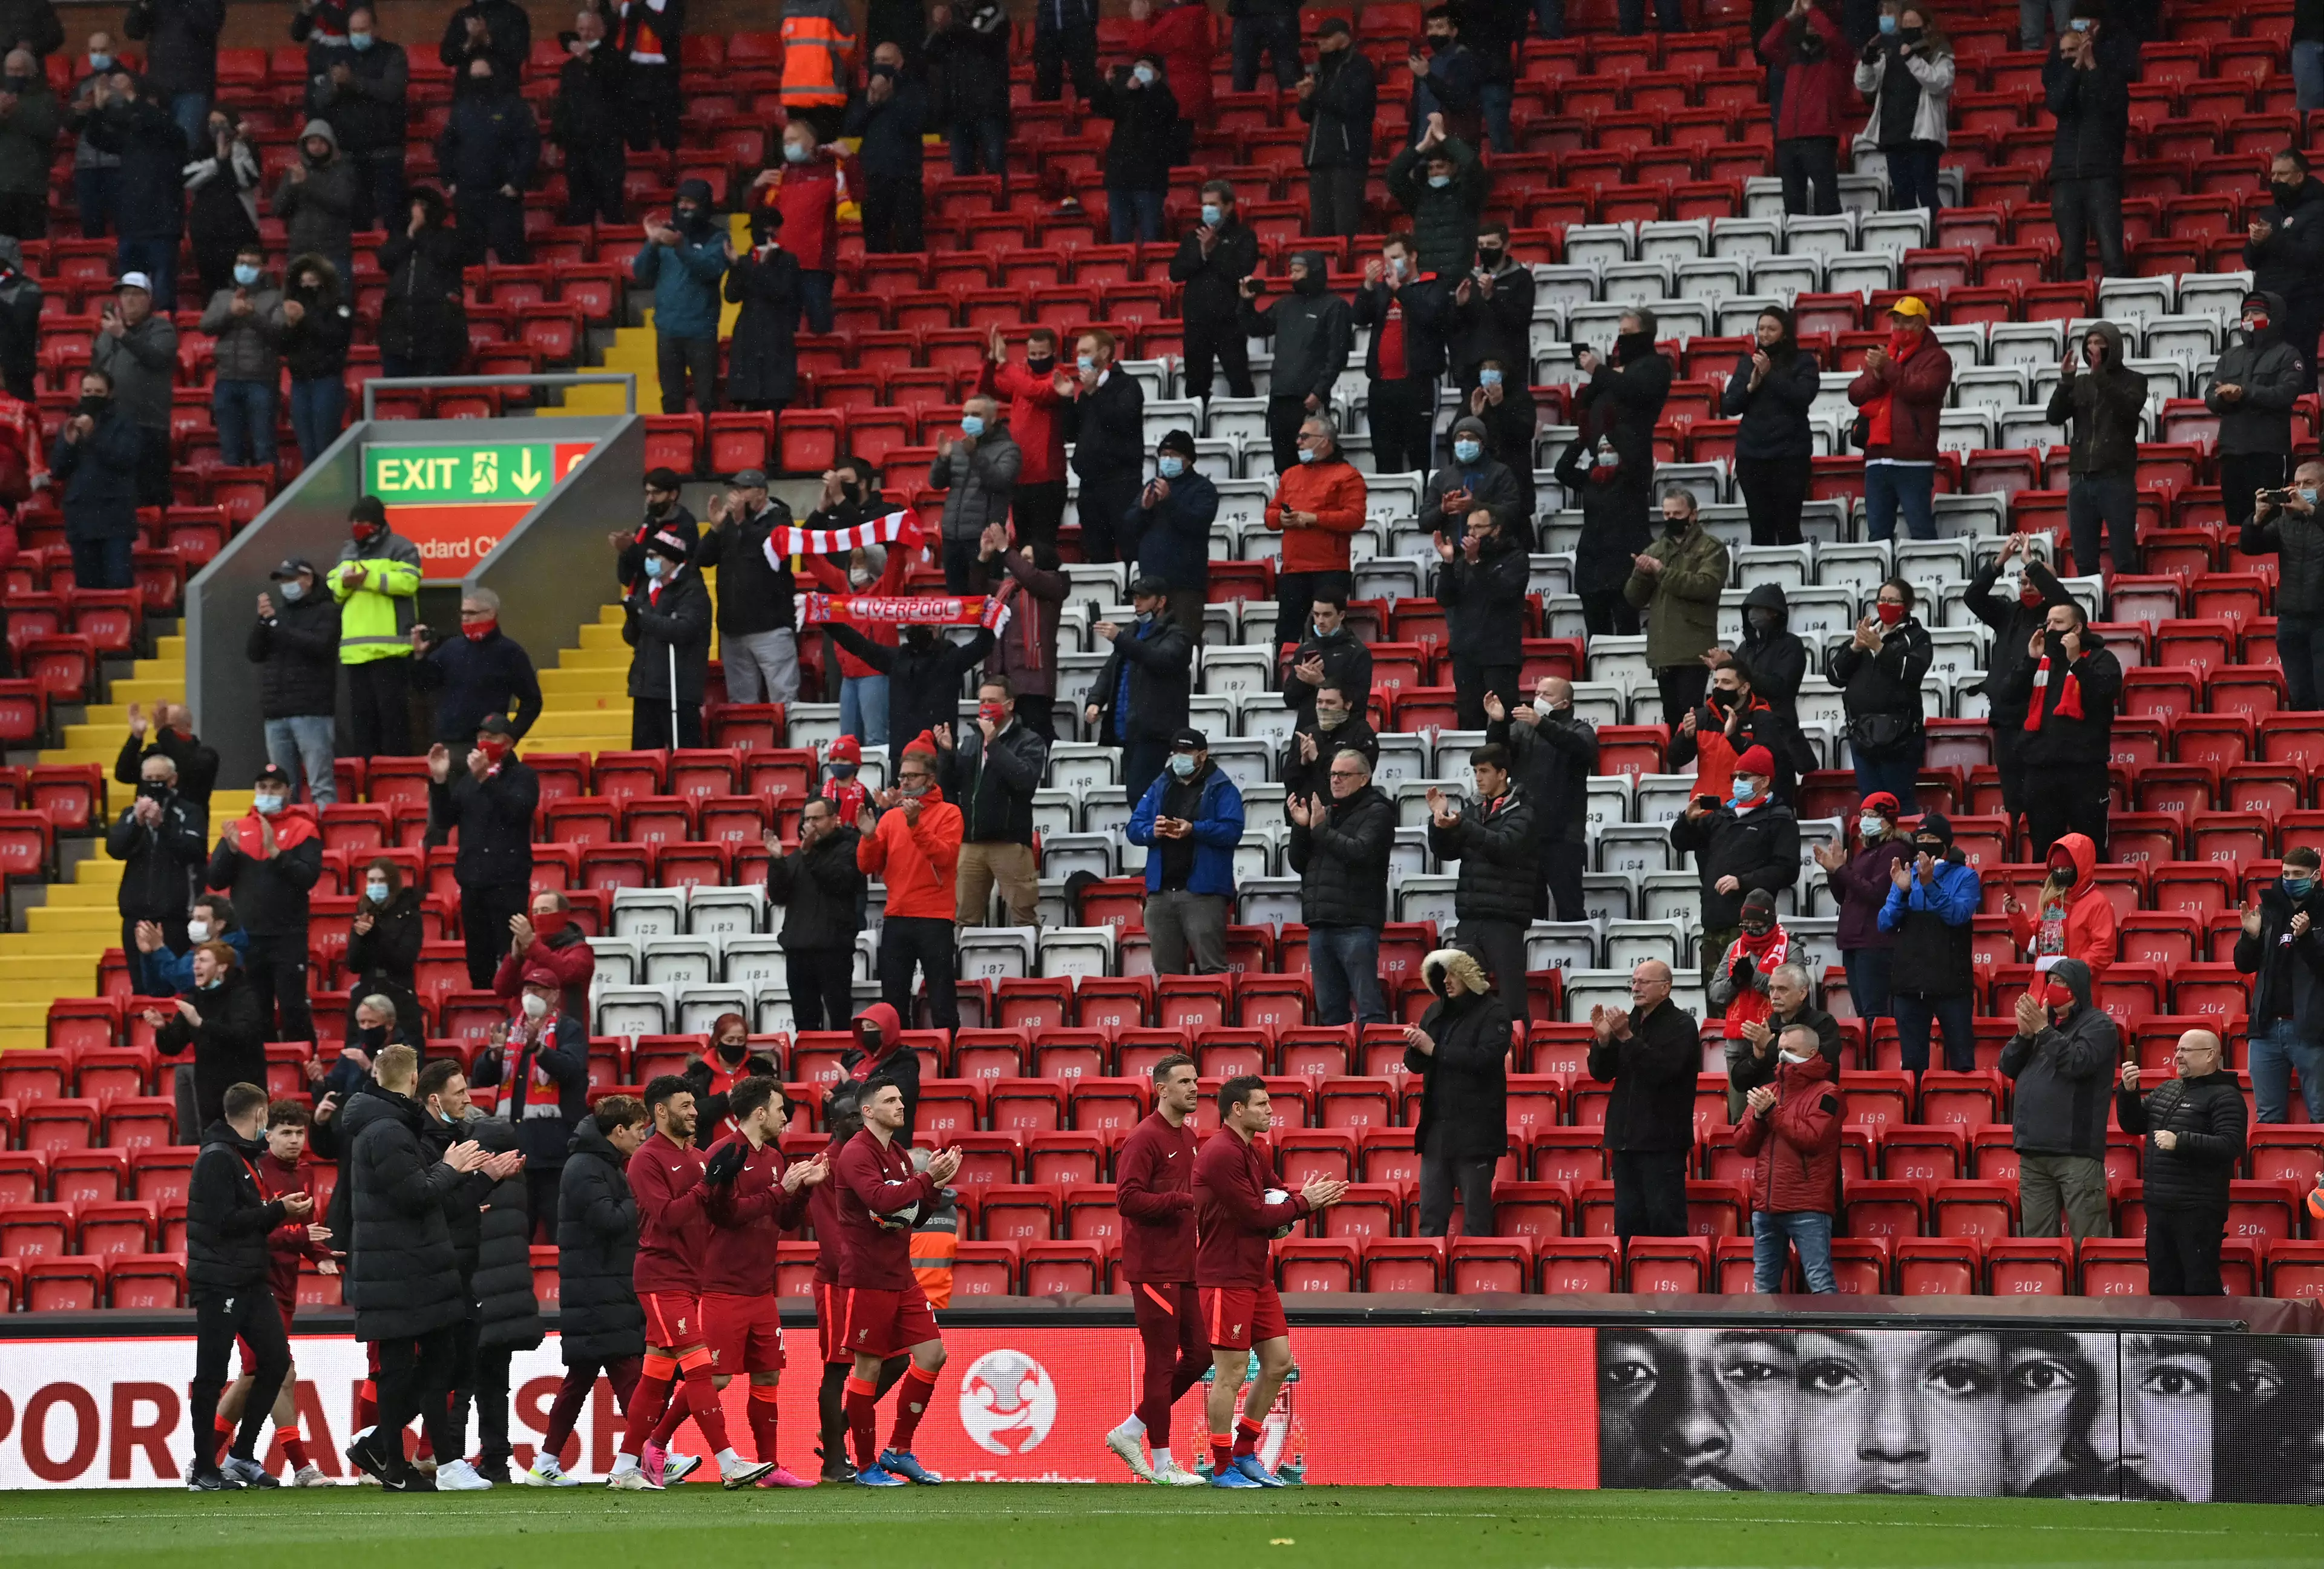 Liverpool players applaud their fans after playing Crystal Palace on the final day of the season. Image: PA Images